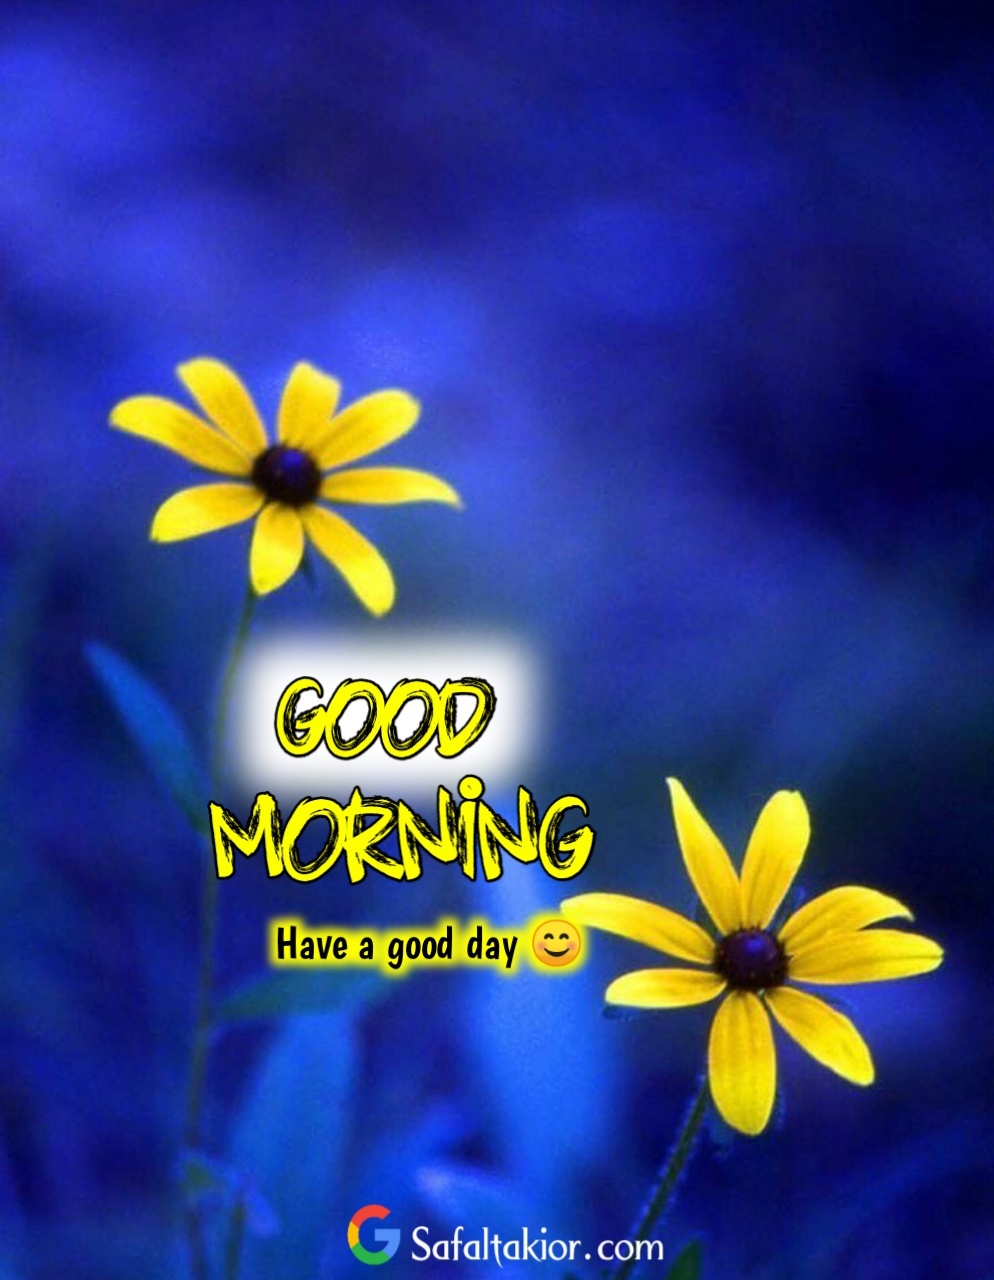 Good Morning Images with flowers HD